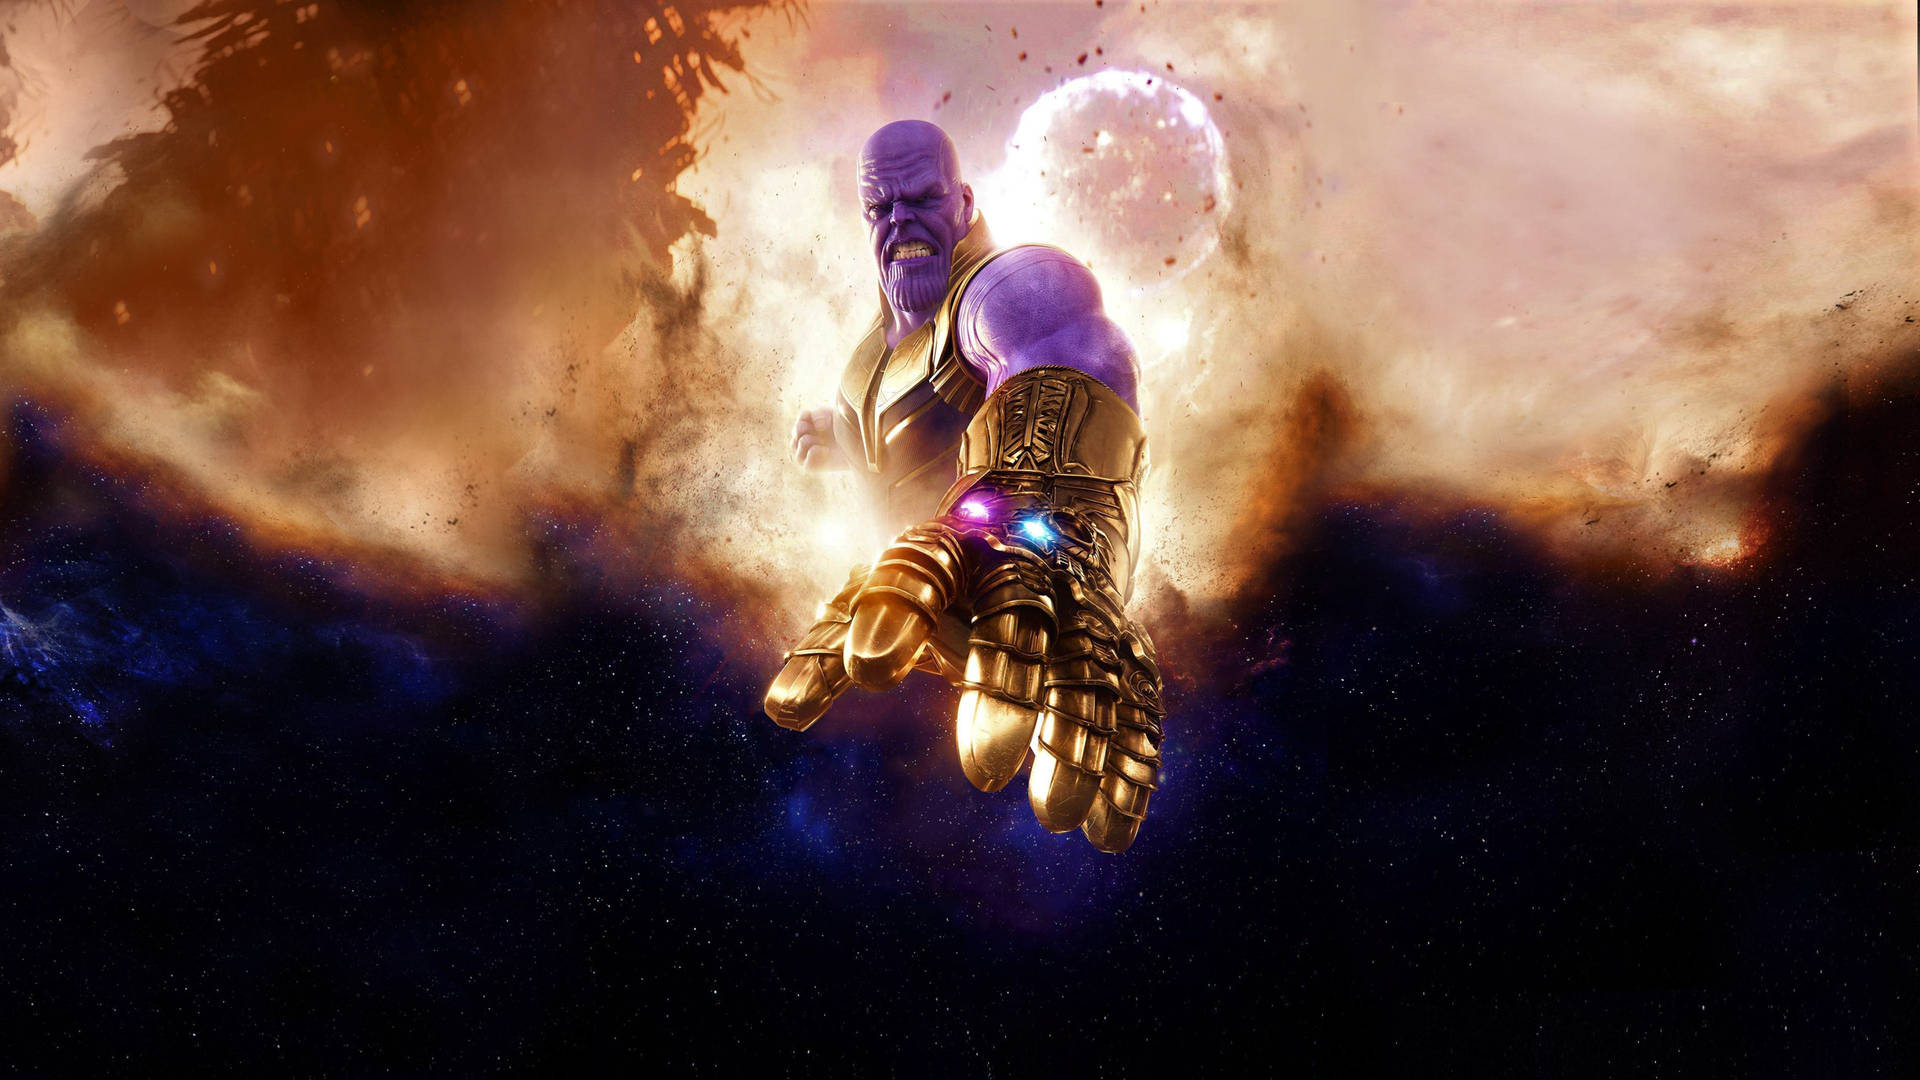 The Mad Titan Thanos in Avengers: Infinity War Wallpaper